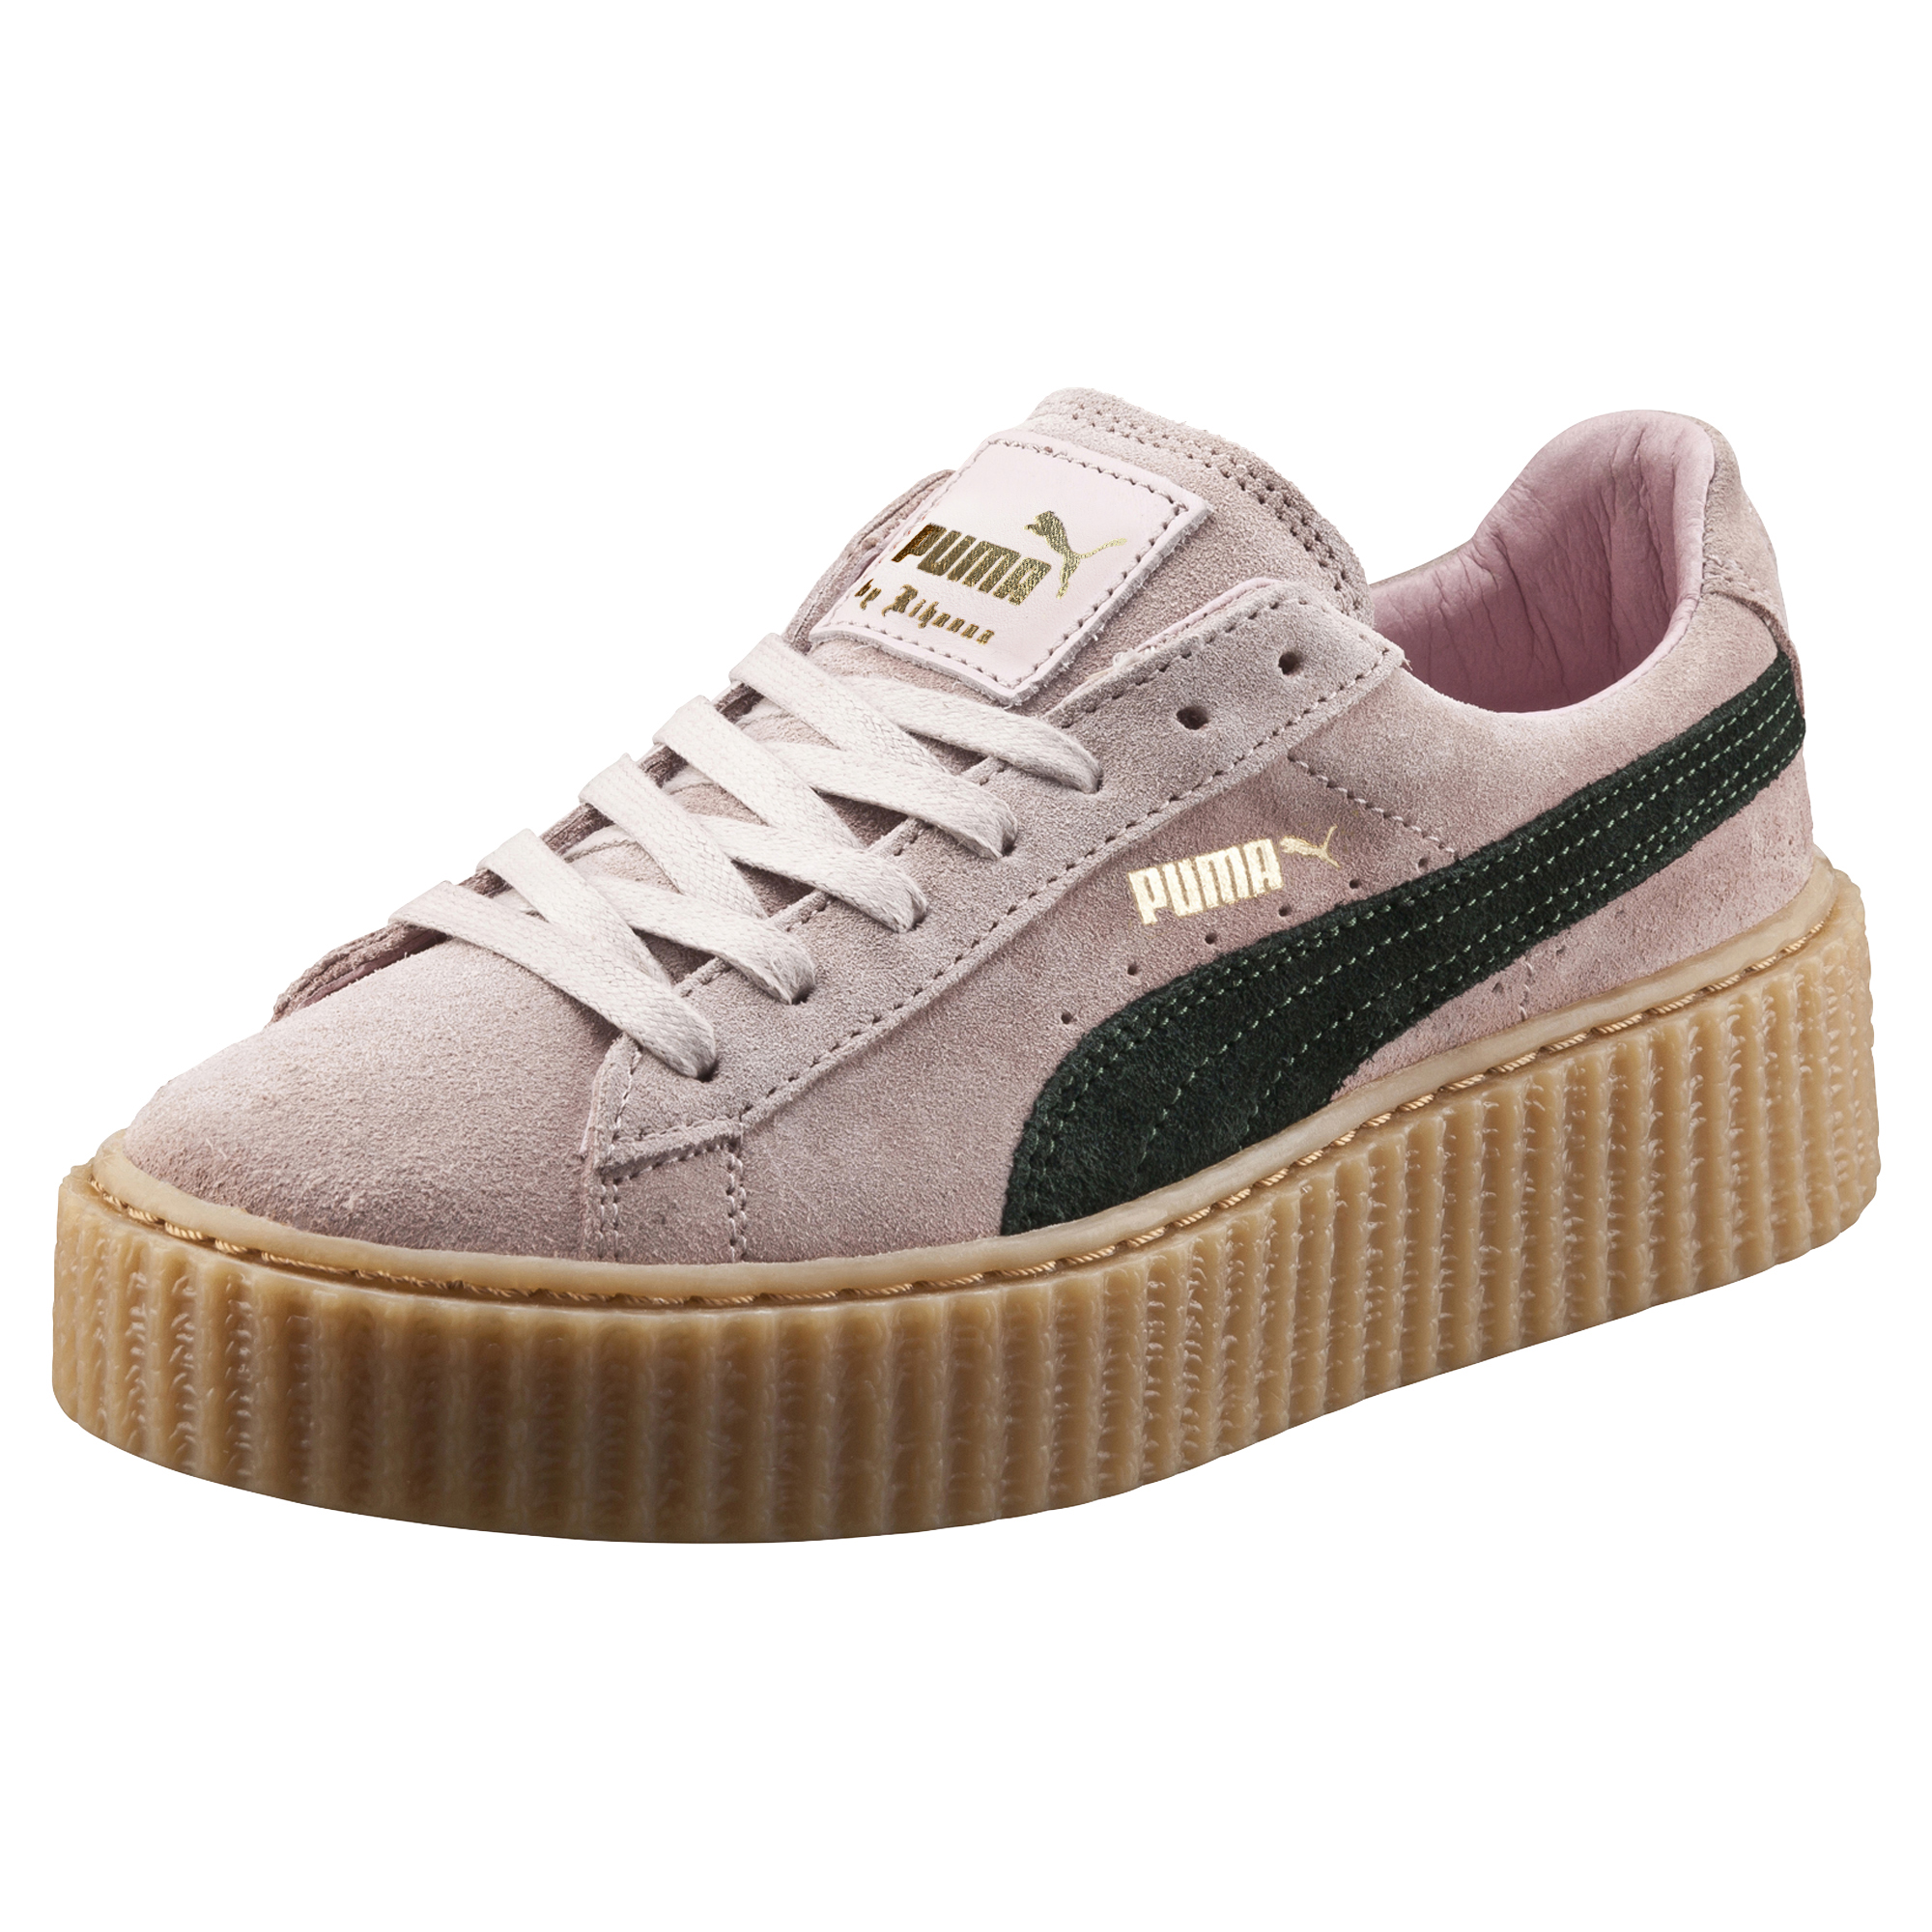 Get Your Hands On PUMA by Rihanna 